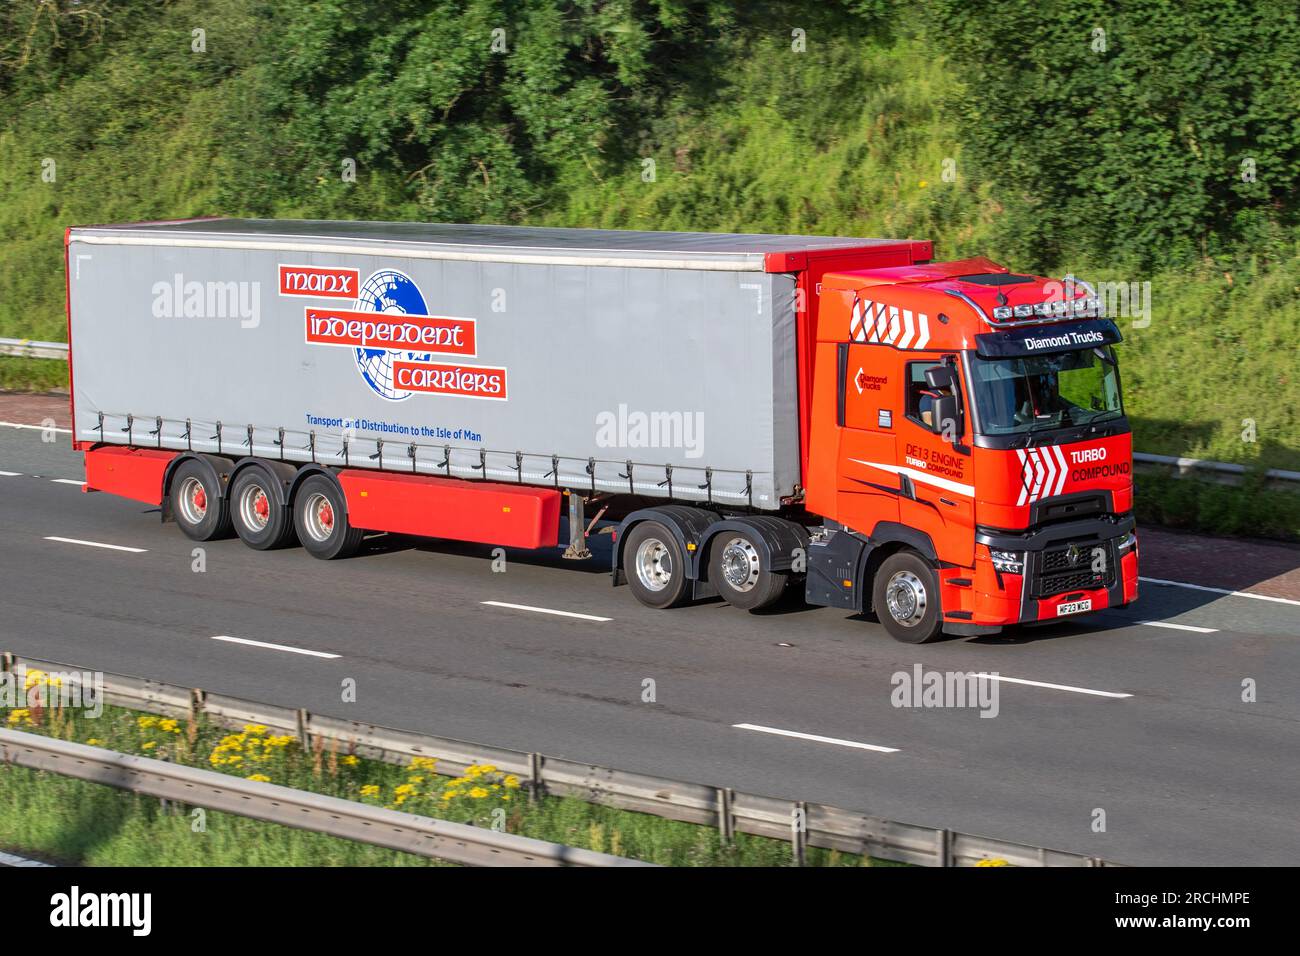 Manx Independent carriers; Haulage delivery trucks, lorry, heavy-duty vehicles, transportation, DAF tractor unit truck, cargo carrier, vehicle, European commercial transport industry HGV, M6 at Manchester, UK Stock Photo